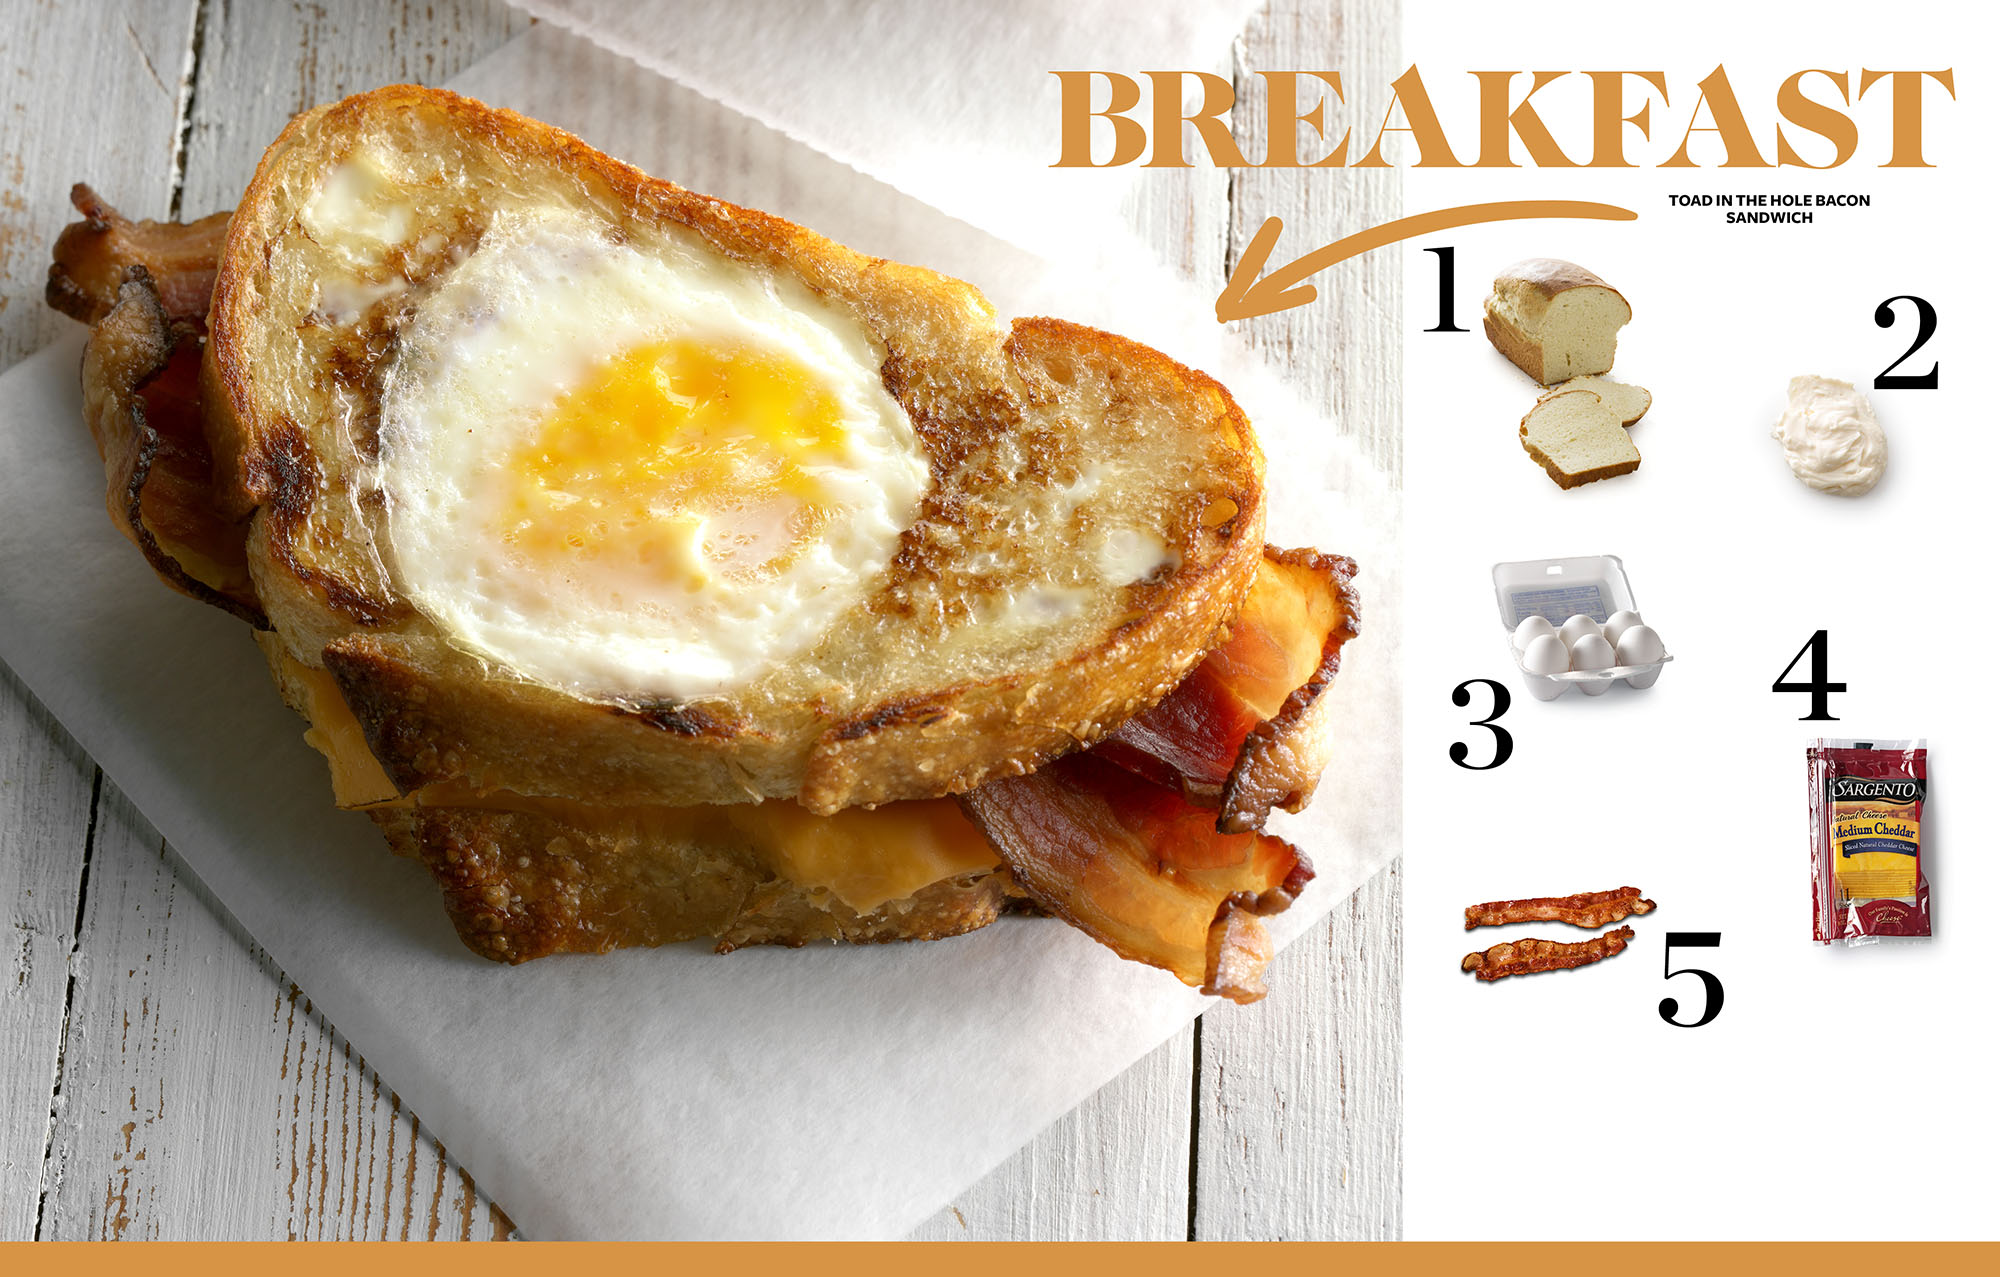 SERVE UP A DELICIOUS HOMEMADE BREAKFAST WITHOUT LOTS OF EARLY-MORNING PREP - photo 7